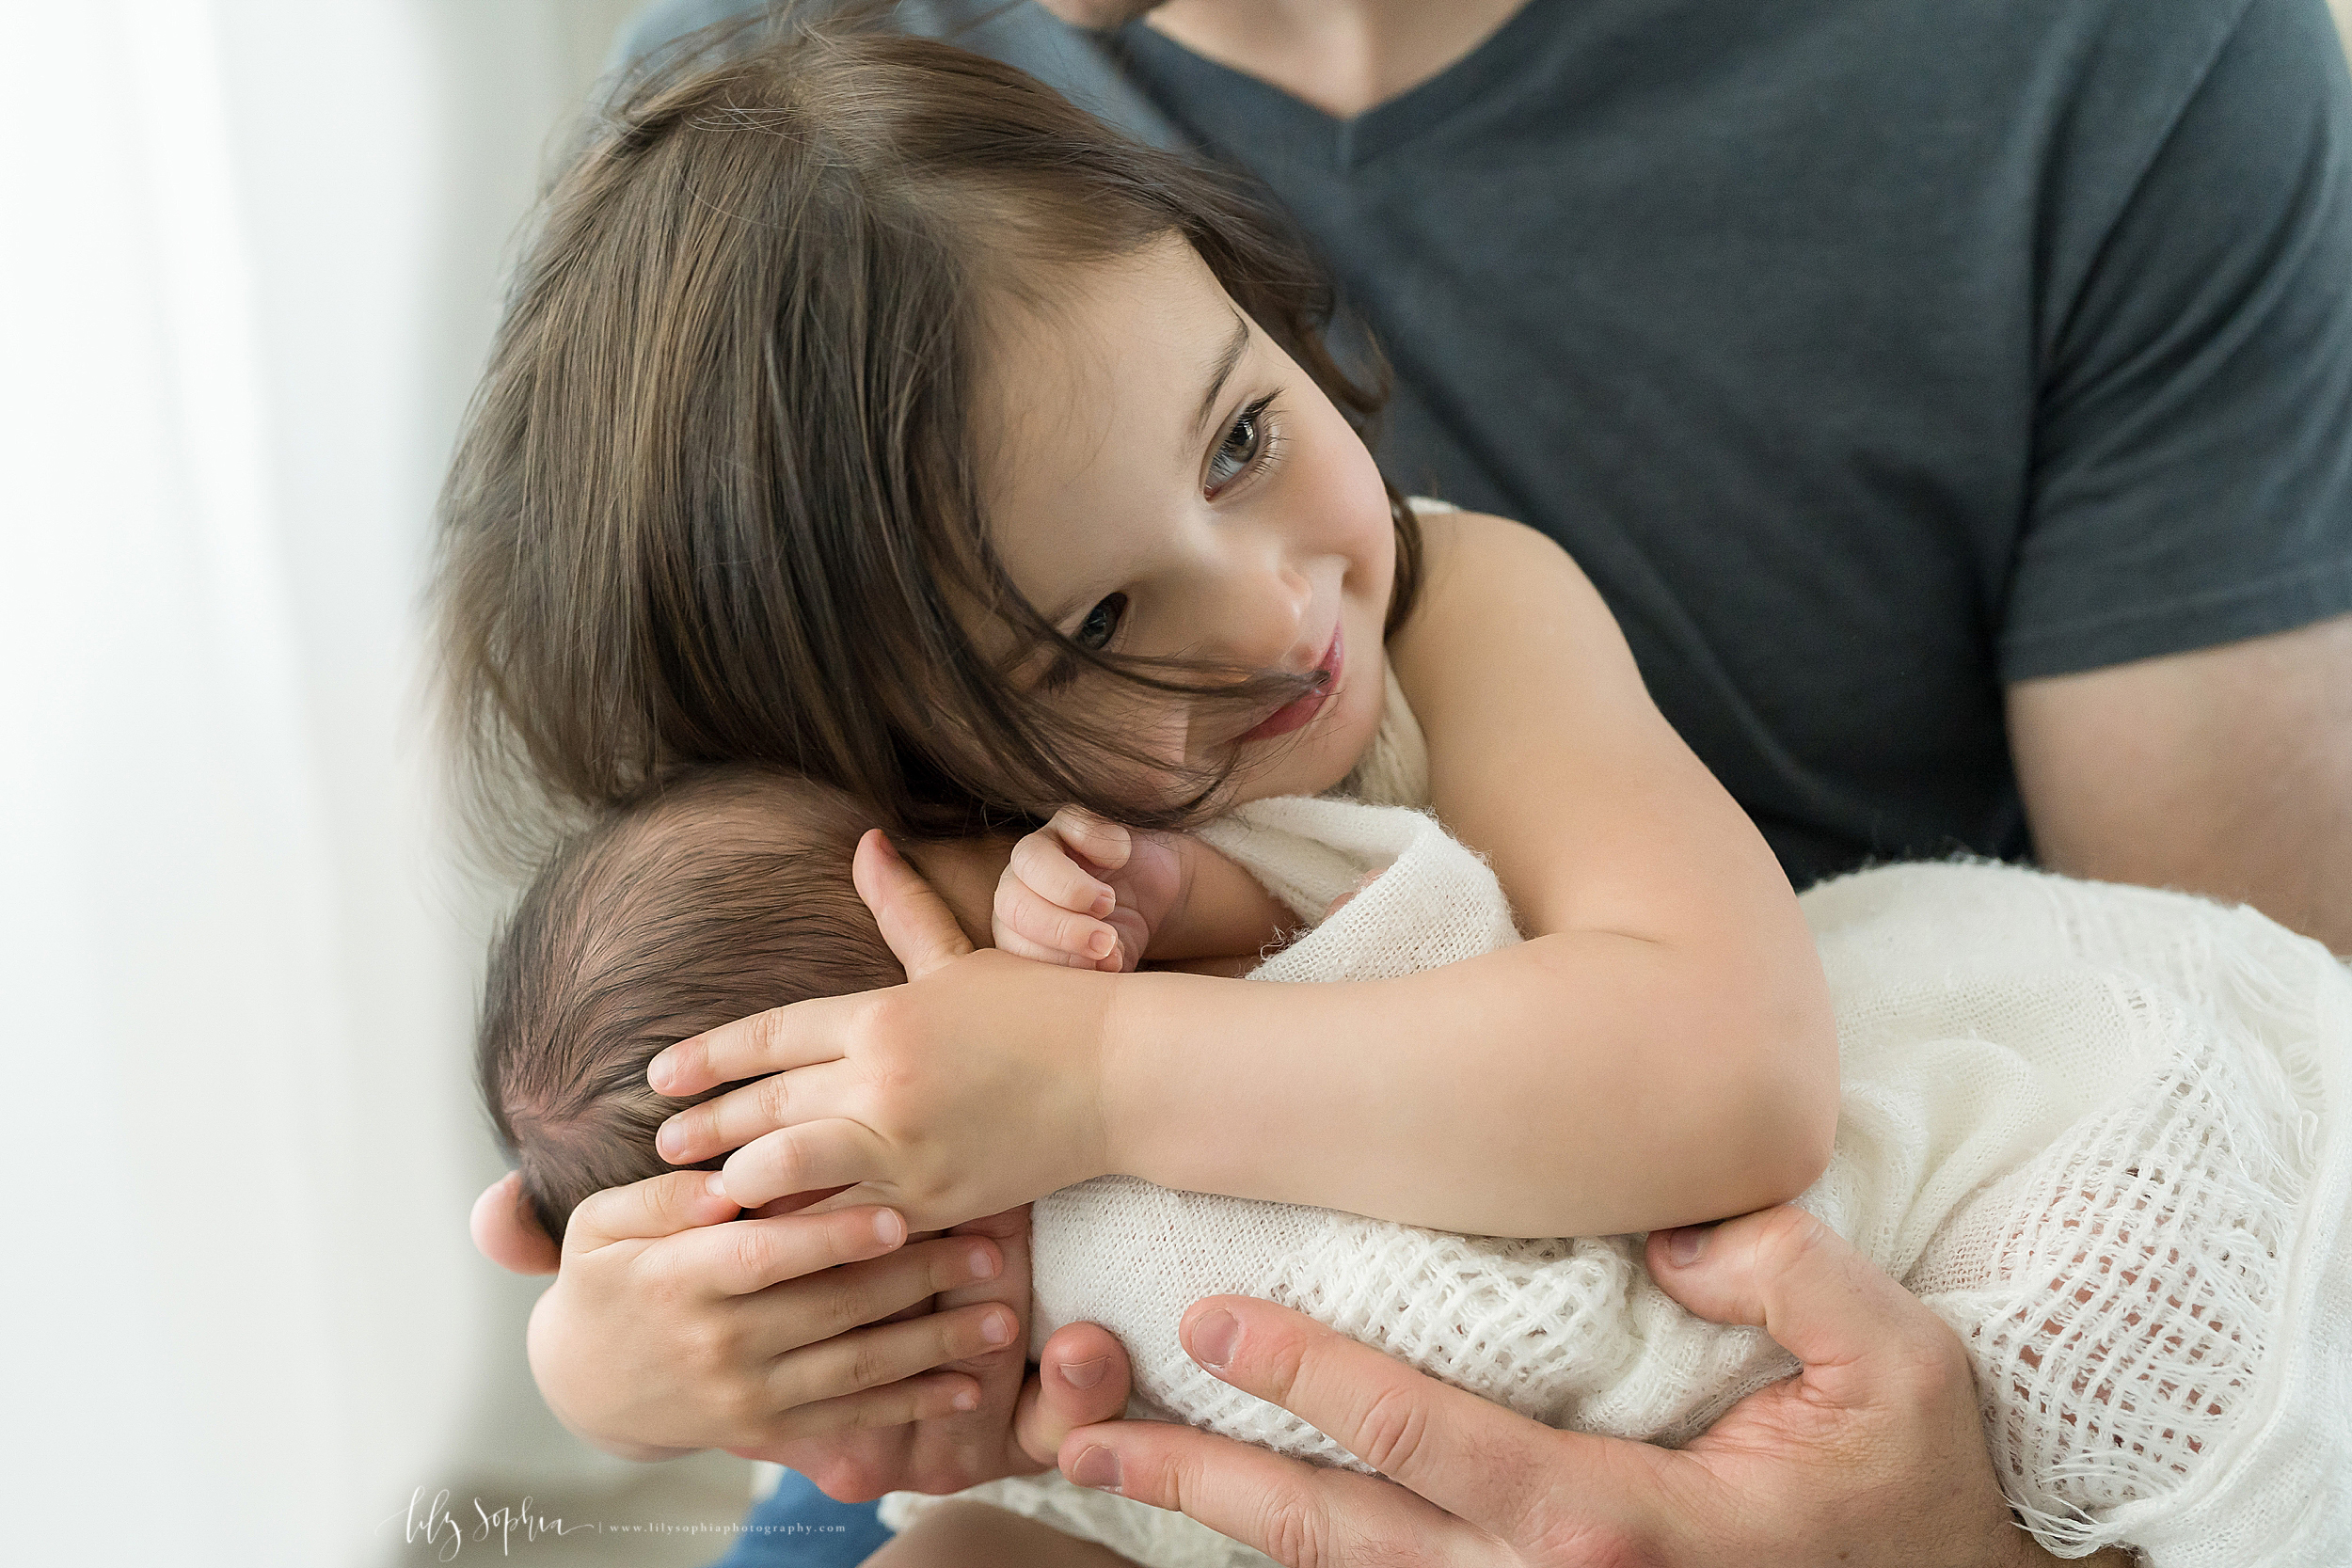  Dad is holding his infant son with brown hair wrapped in a white blanket on his lap. His toddler brunette daughter is giving her brother a giant hug while smiling. 